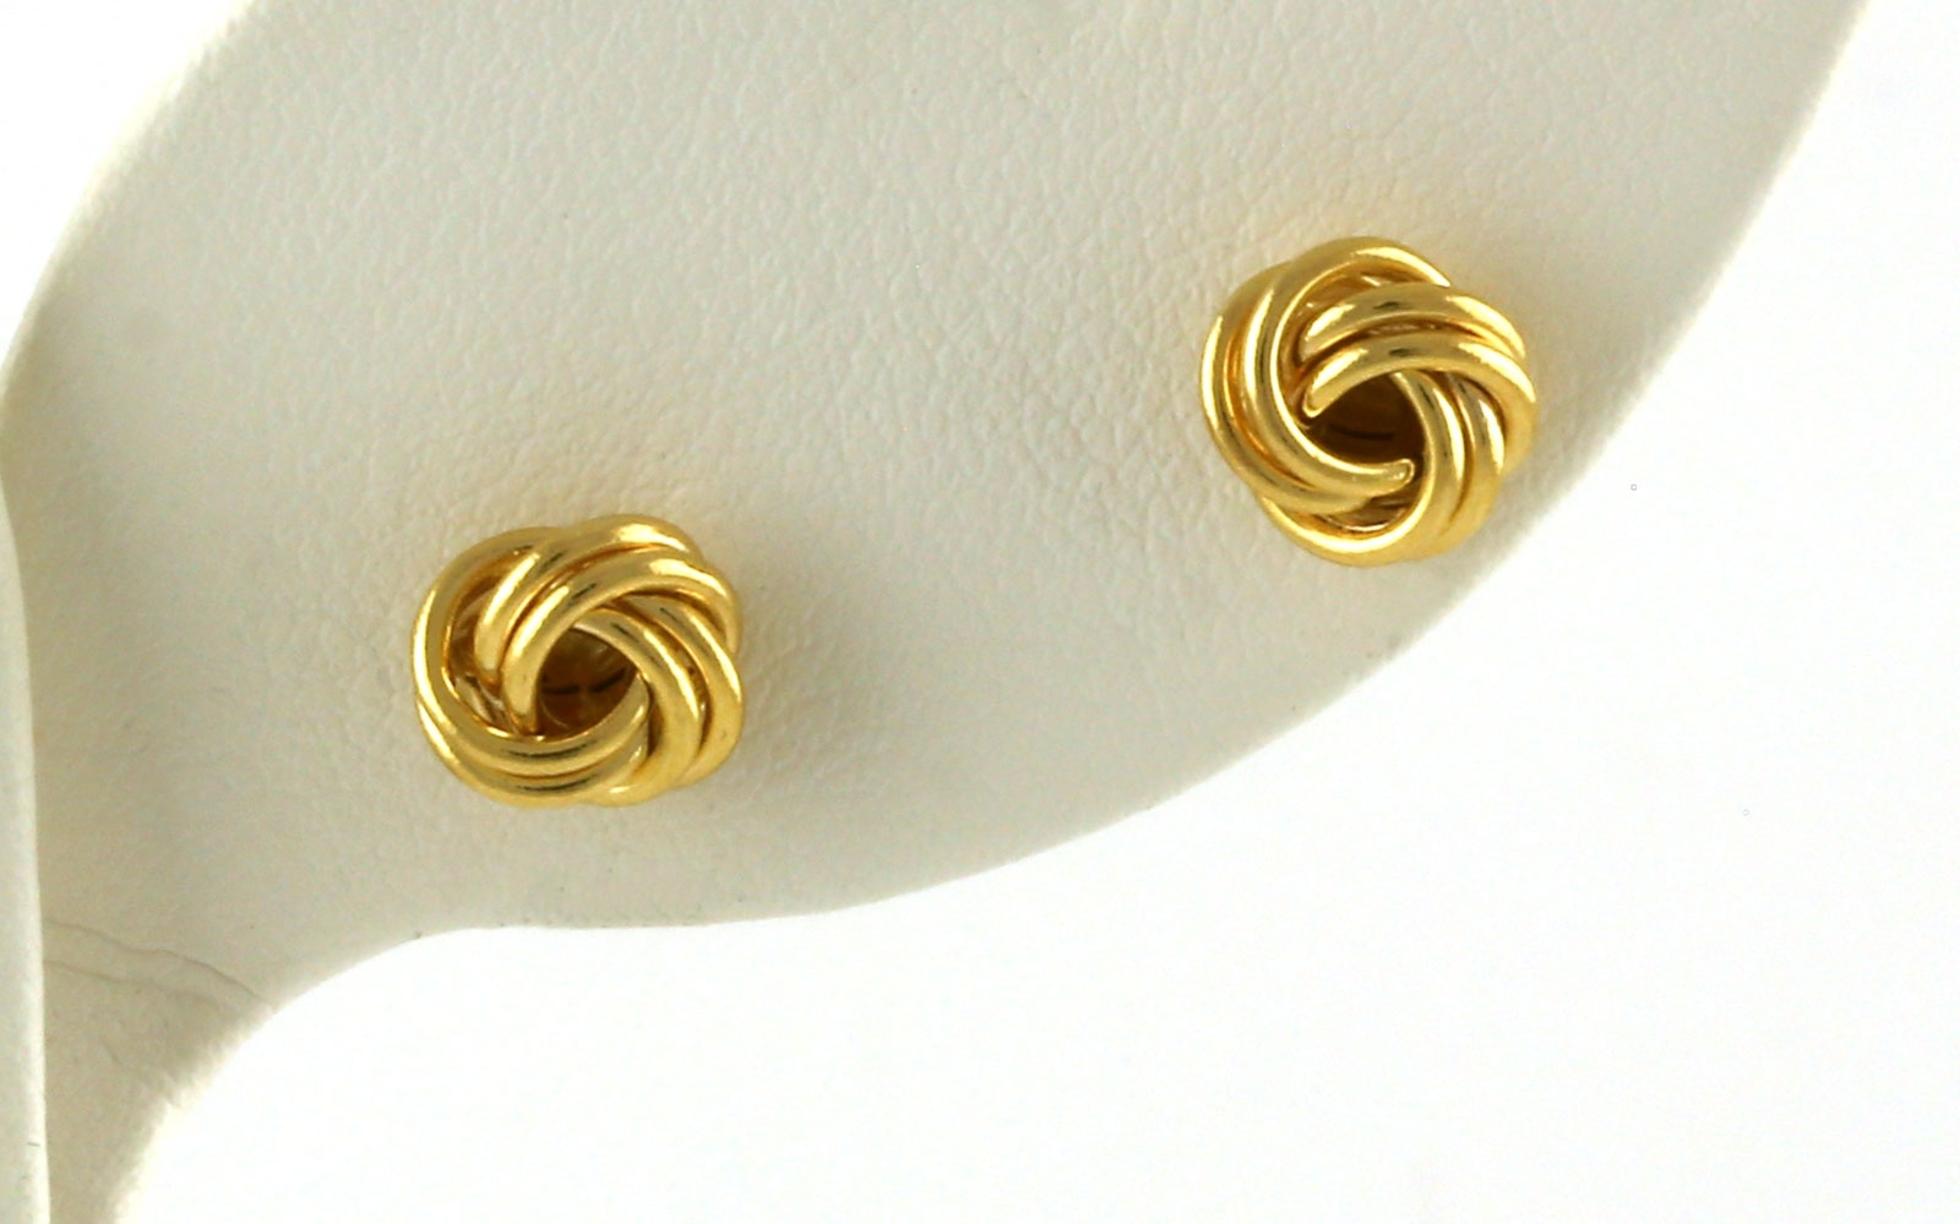 7.5mm Small Rosetta Knot Stud Earrings in Yellow Gold